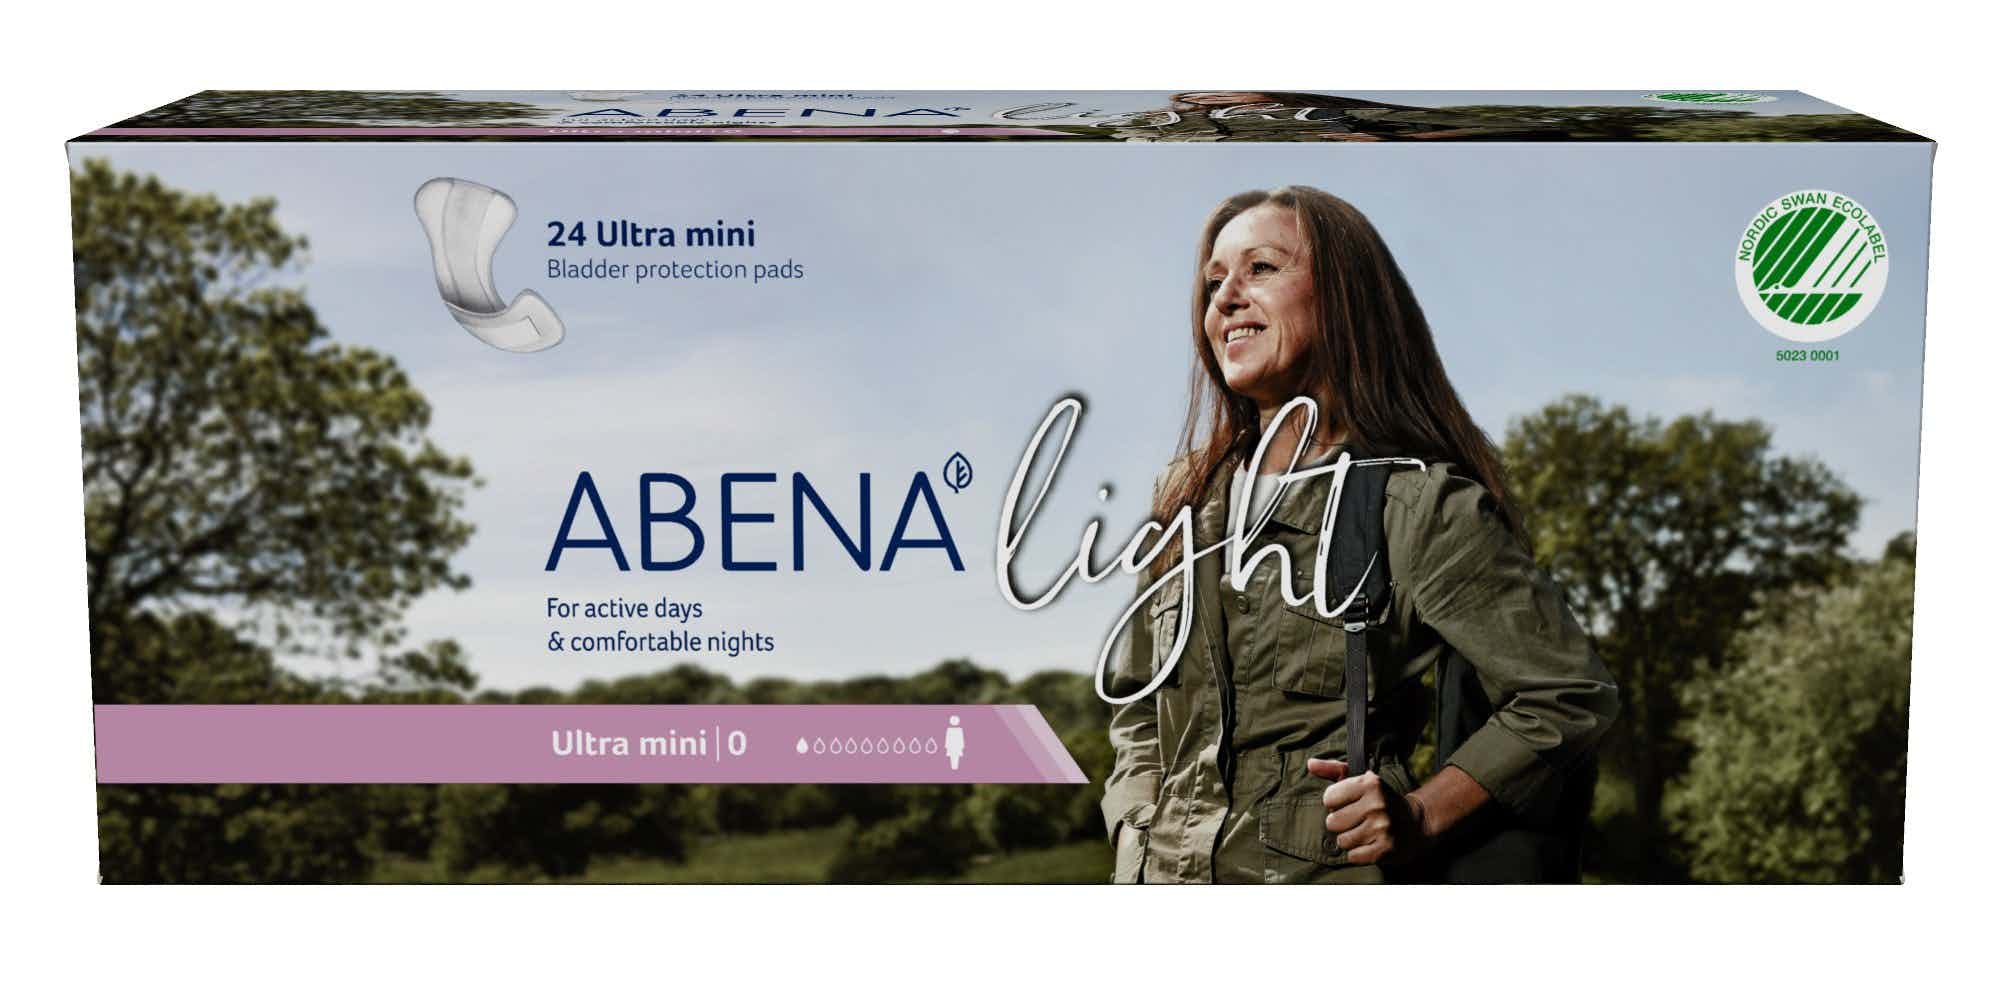 Abena Light Ultra Mini Unisex Adult Bladder Control Pad, Light Absorbency, 1000005436, One Size Fits Most -  Bag of 24